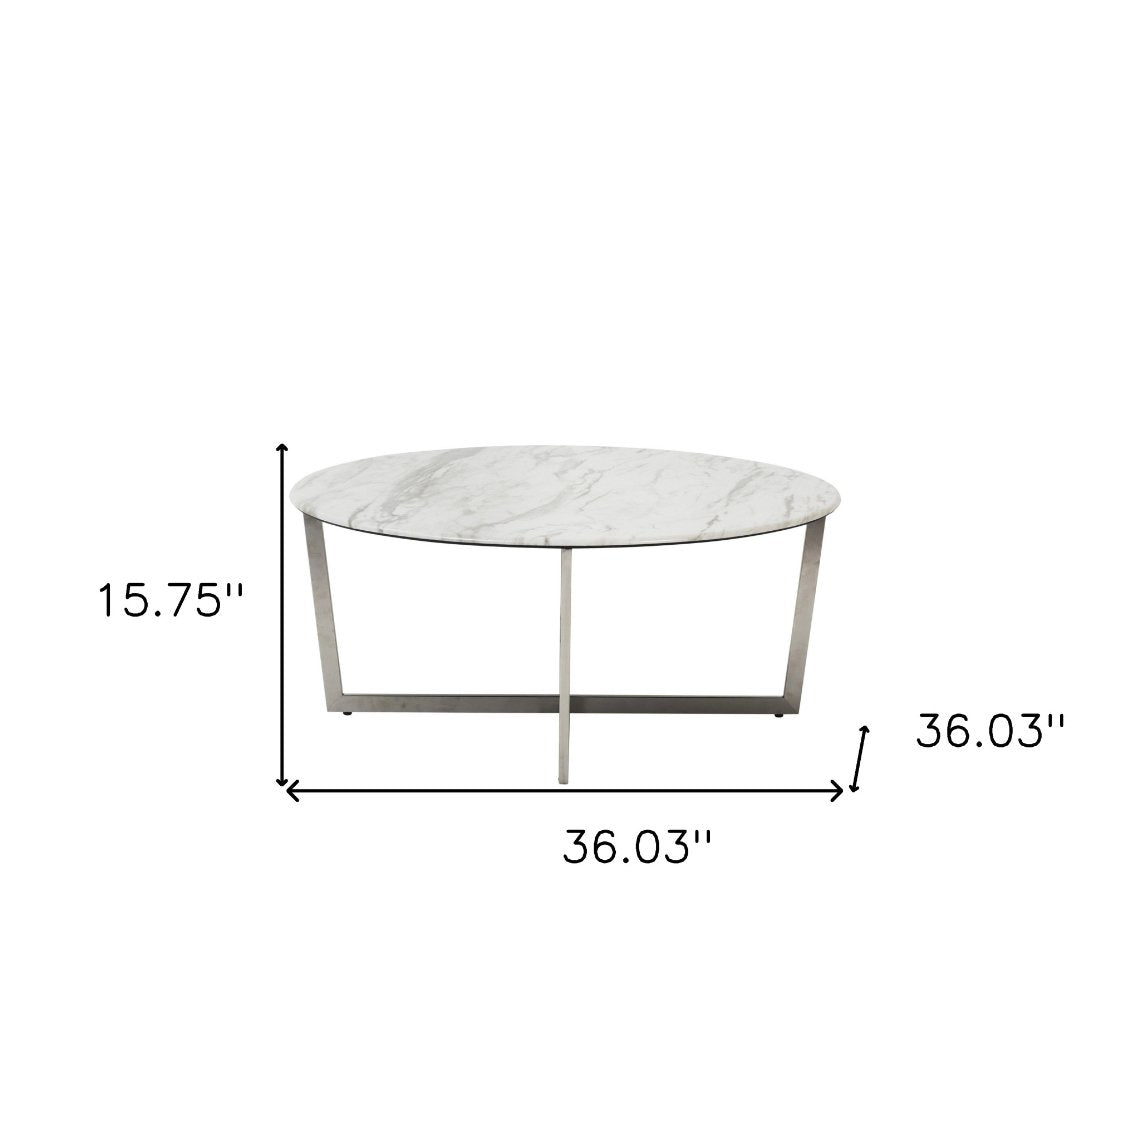 White Marble On Stainless Steel Round Coffee Center Table - Revel Sofa 